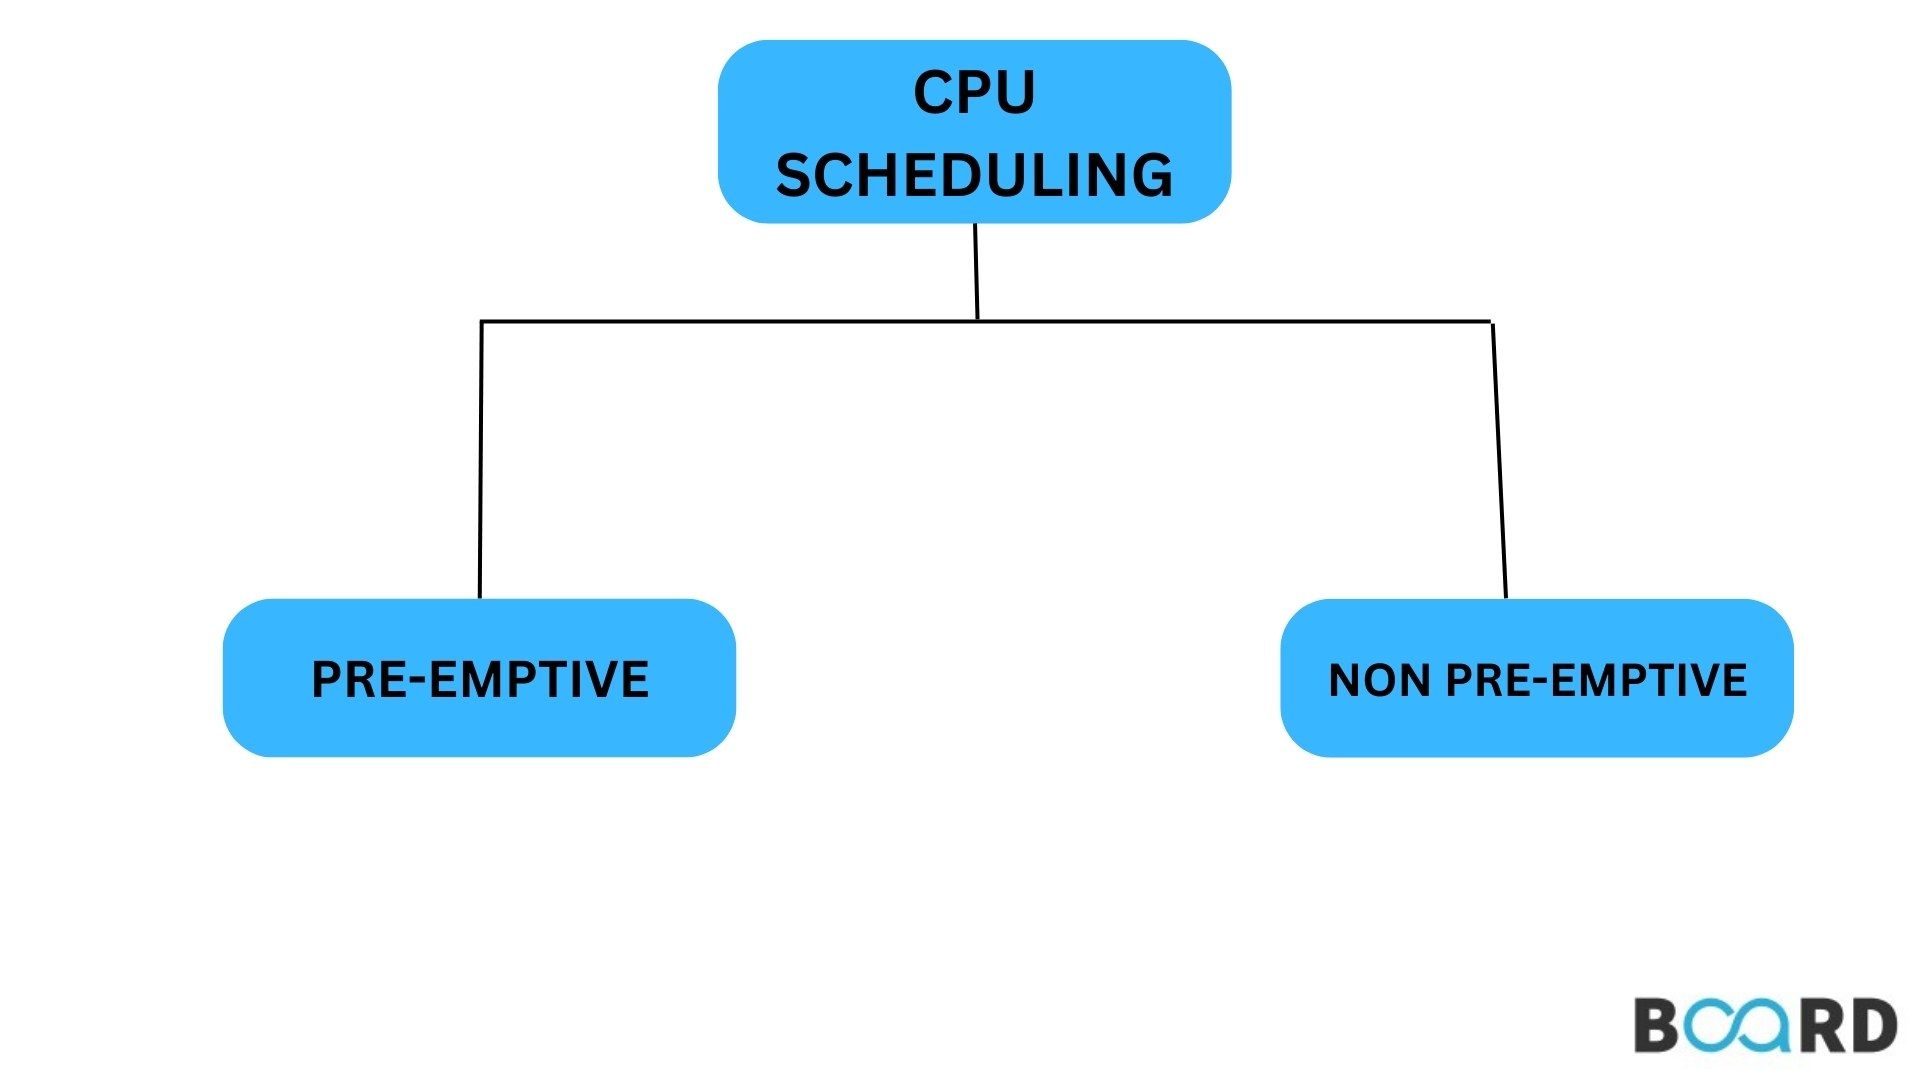 How does CPU Scheduling work?